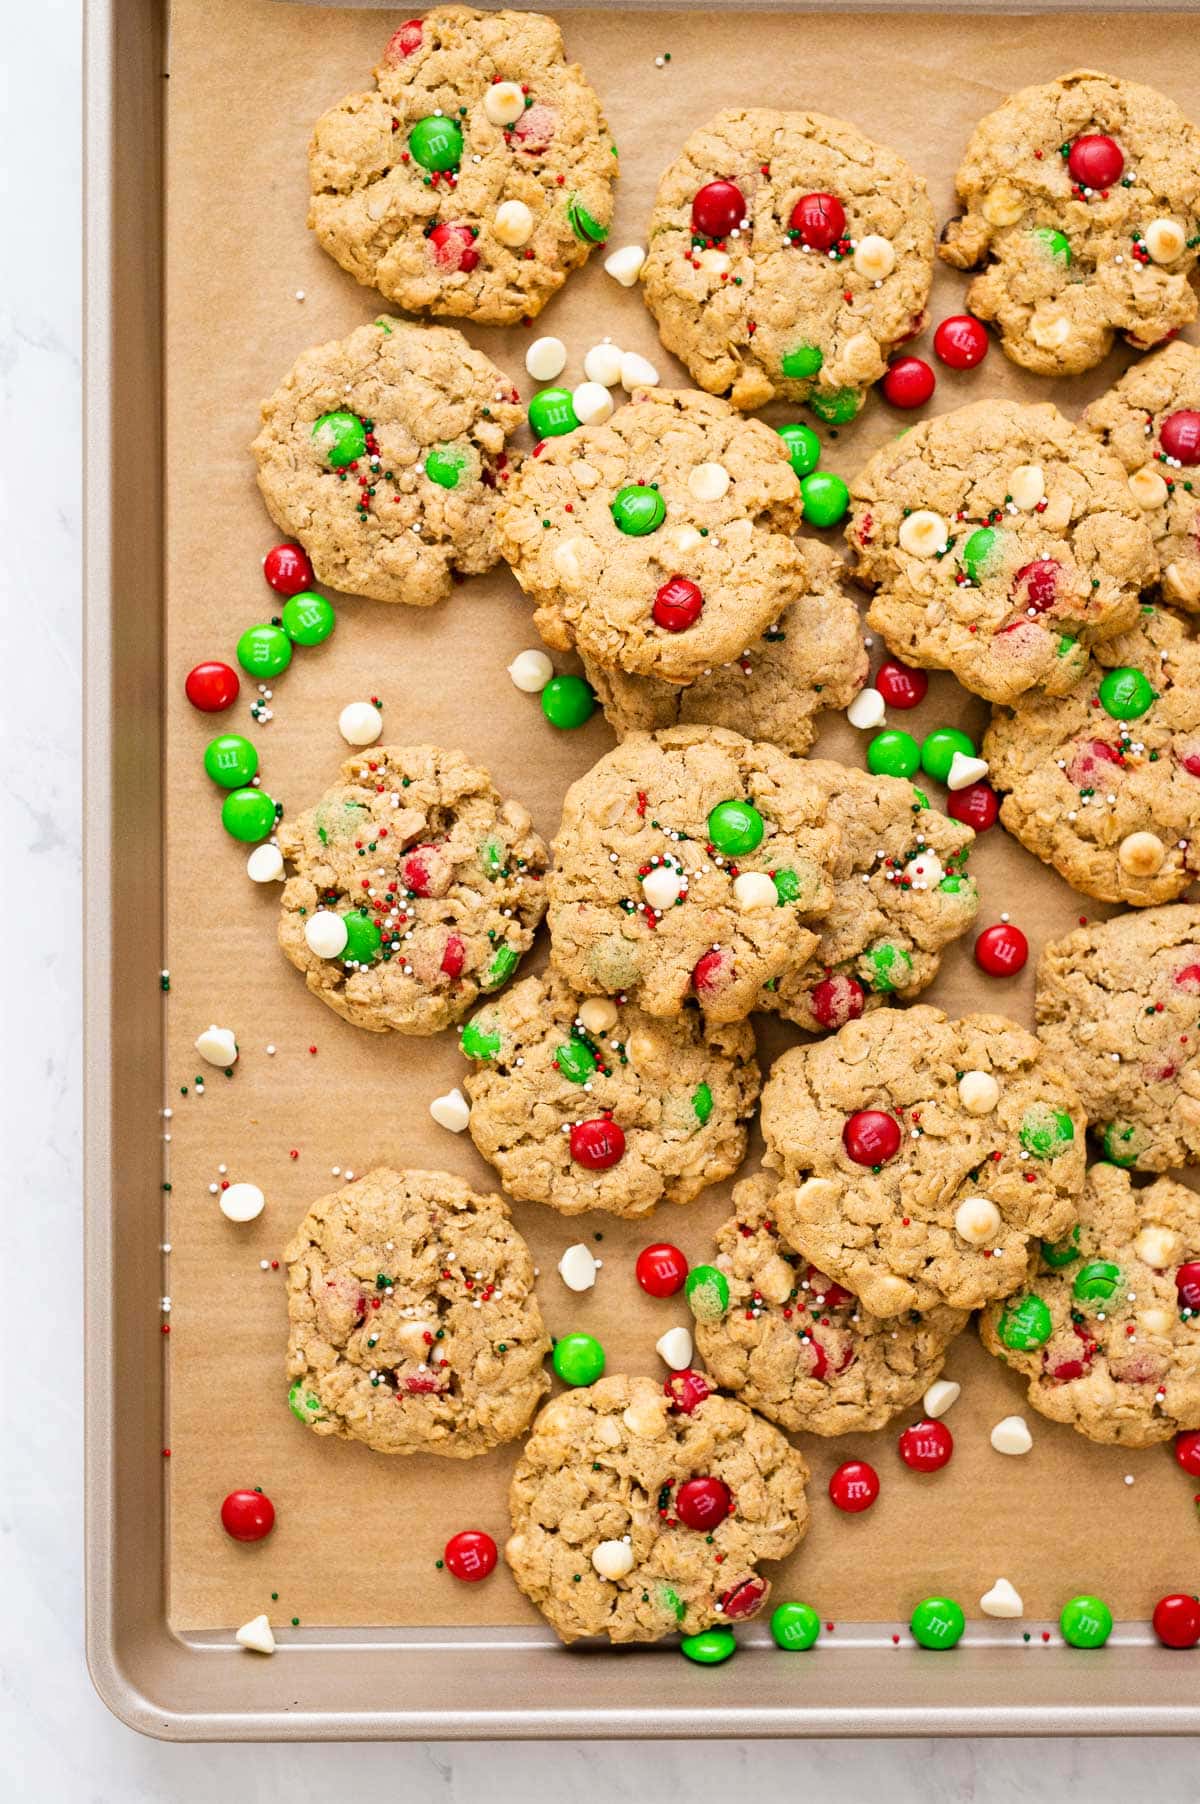 Christmas monster cookies with holiday m&m's and white chocolate chips on baking tray.